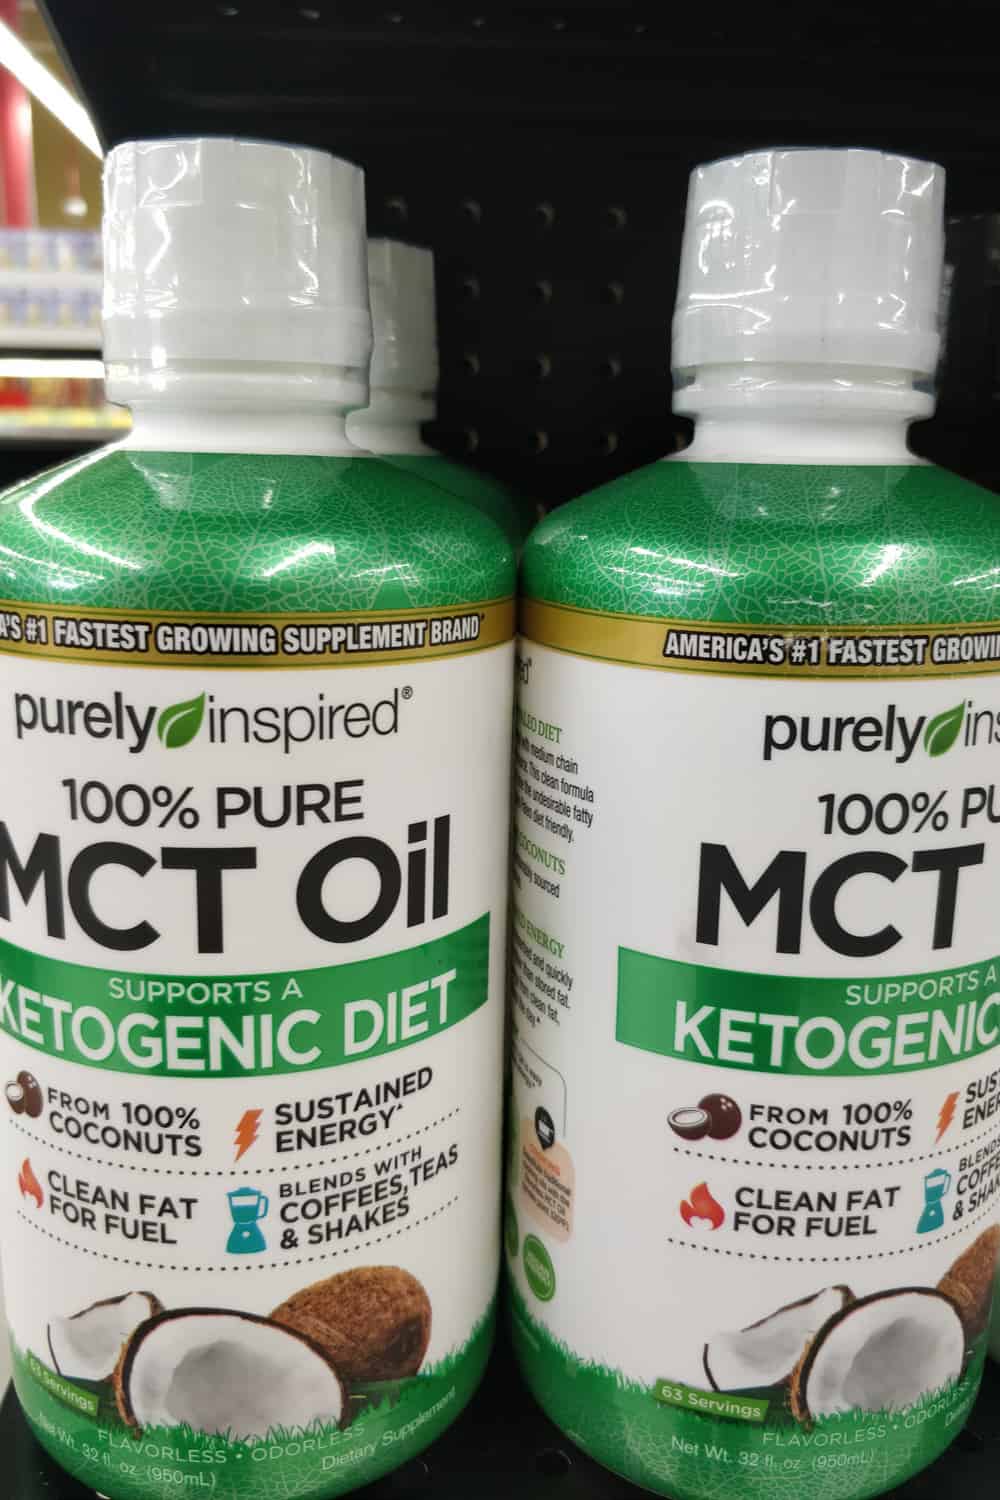 How long does MCT oil last